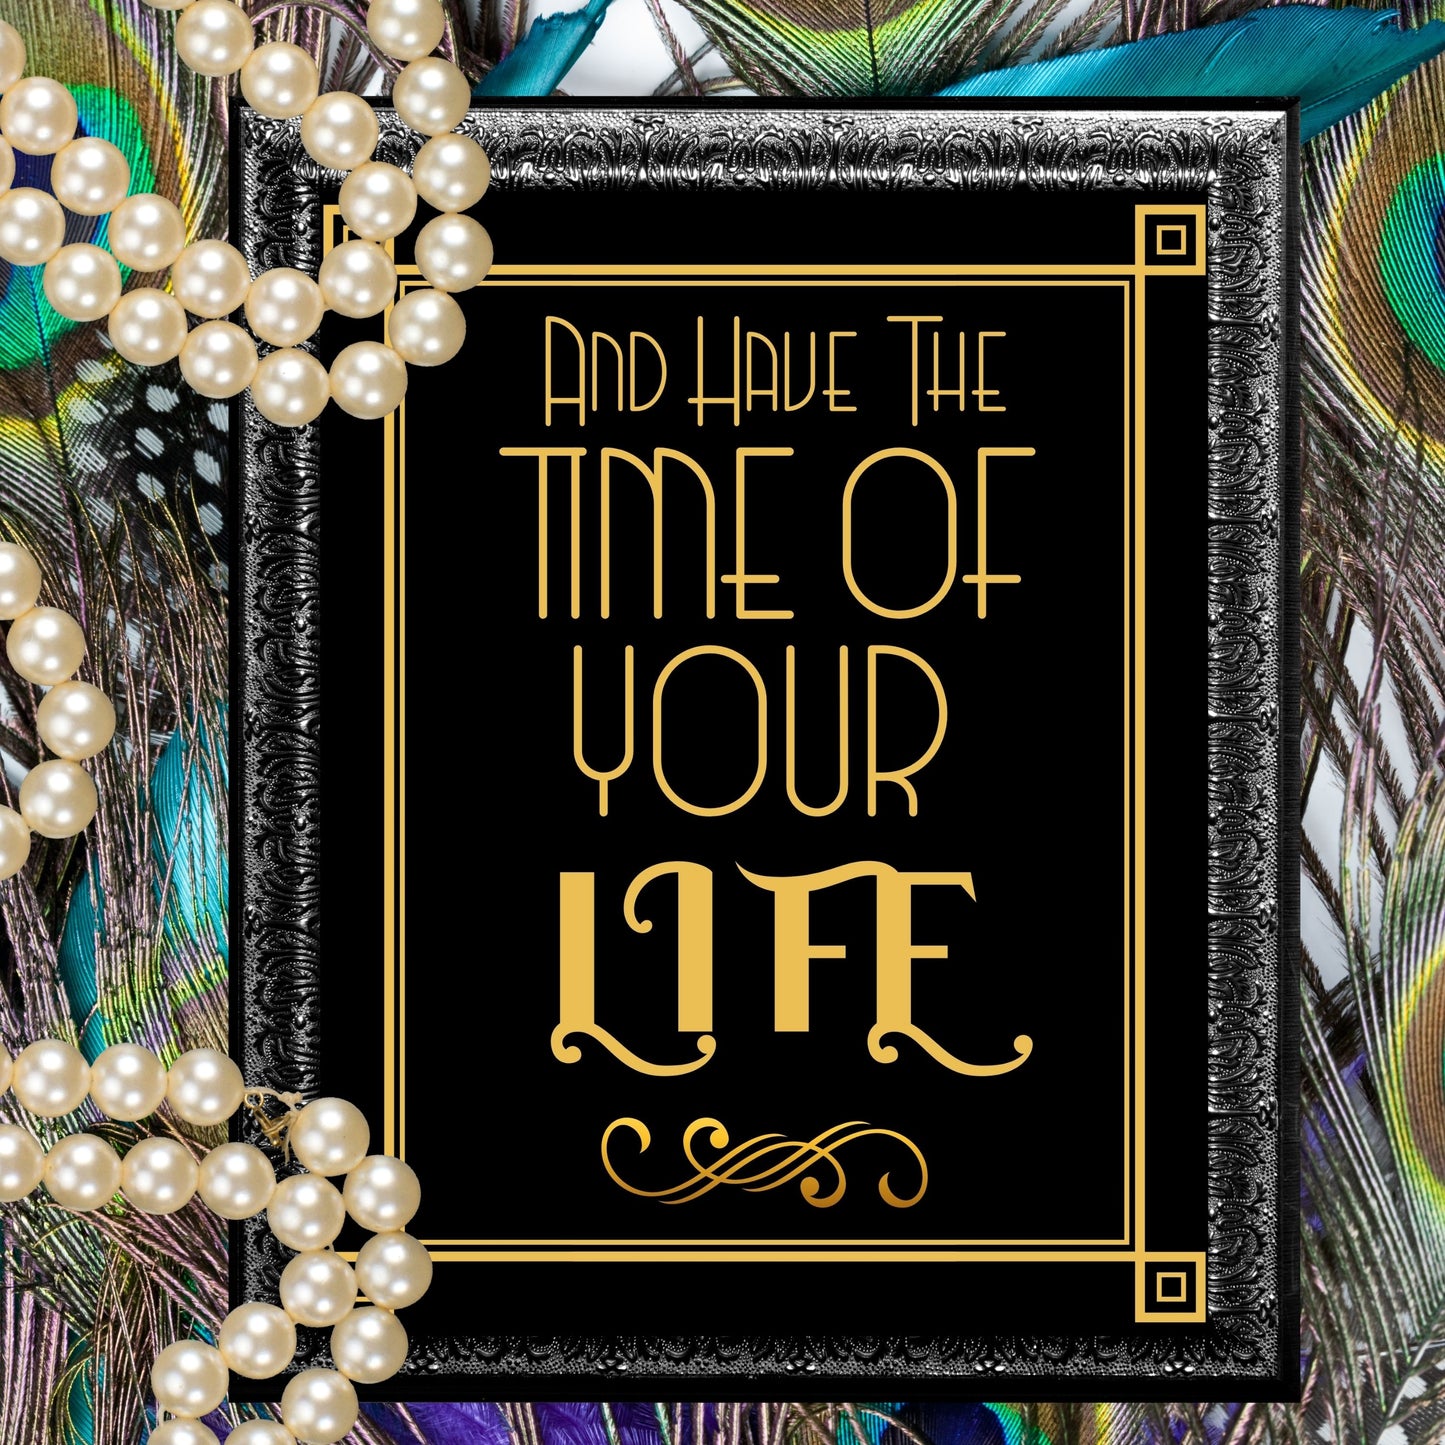 "And Have The Time Of Your Life" Printable Party Sign For Great Gatsby or Roaring 20's Party Or Wedding, Black & Gold, Printable Party Decor